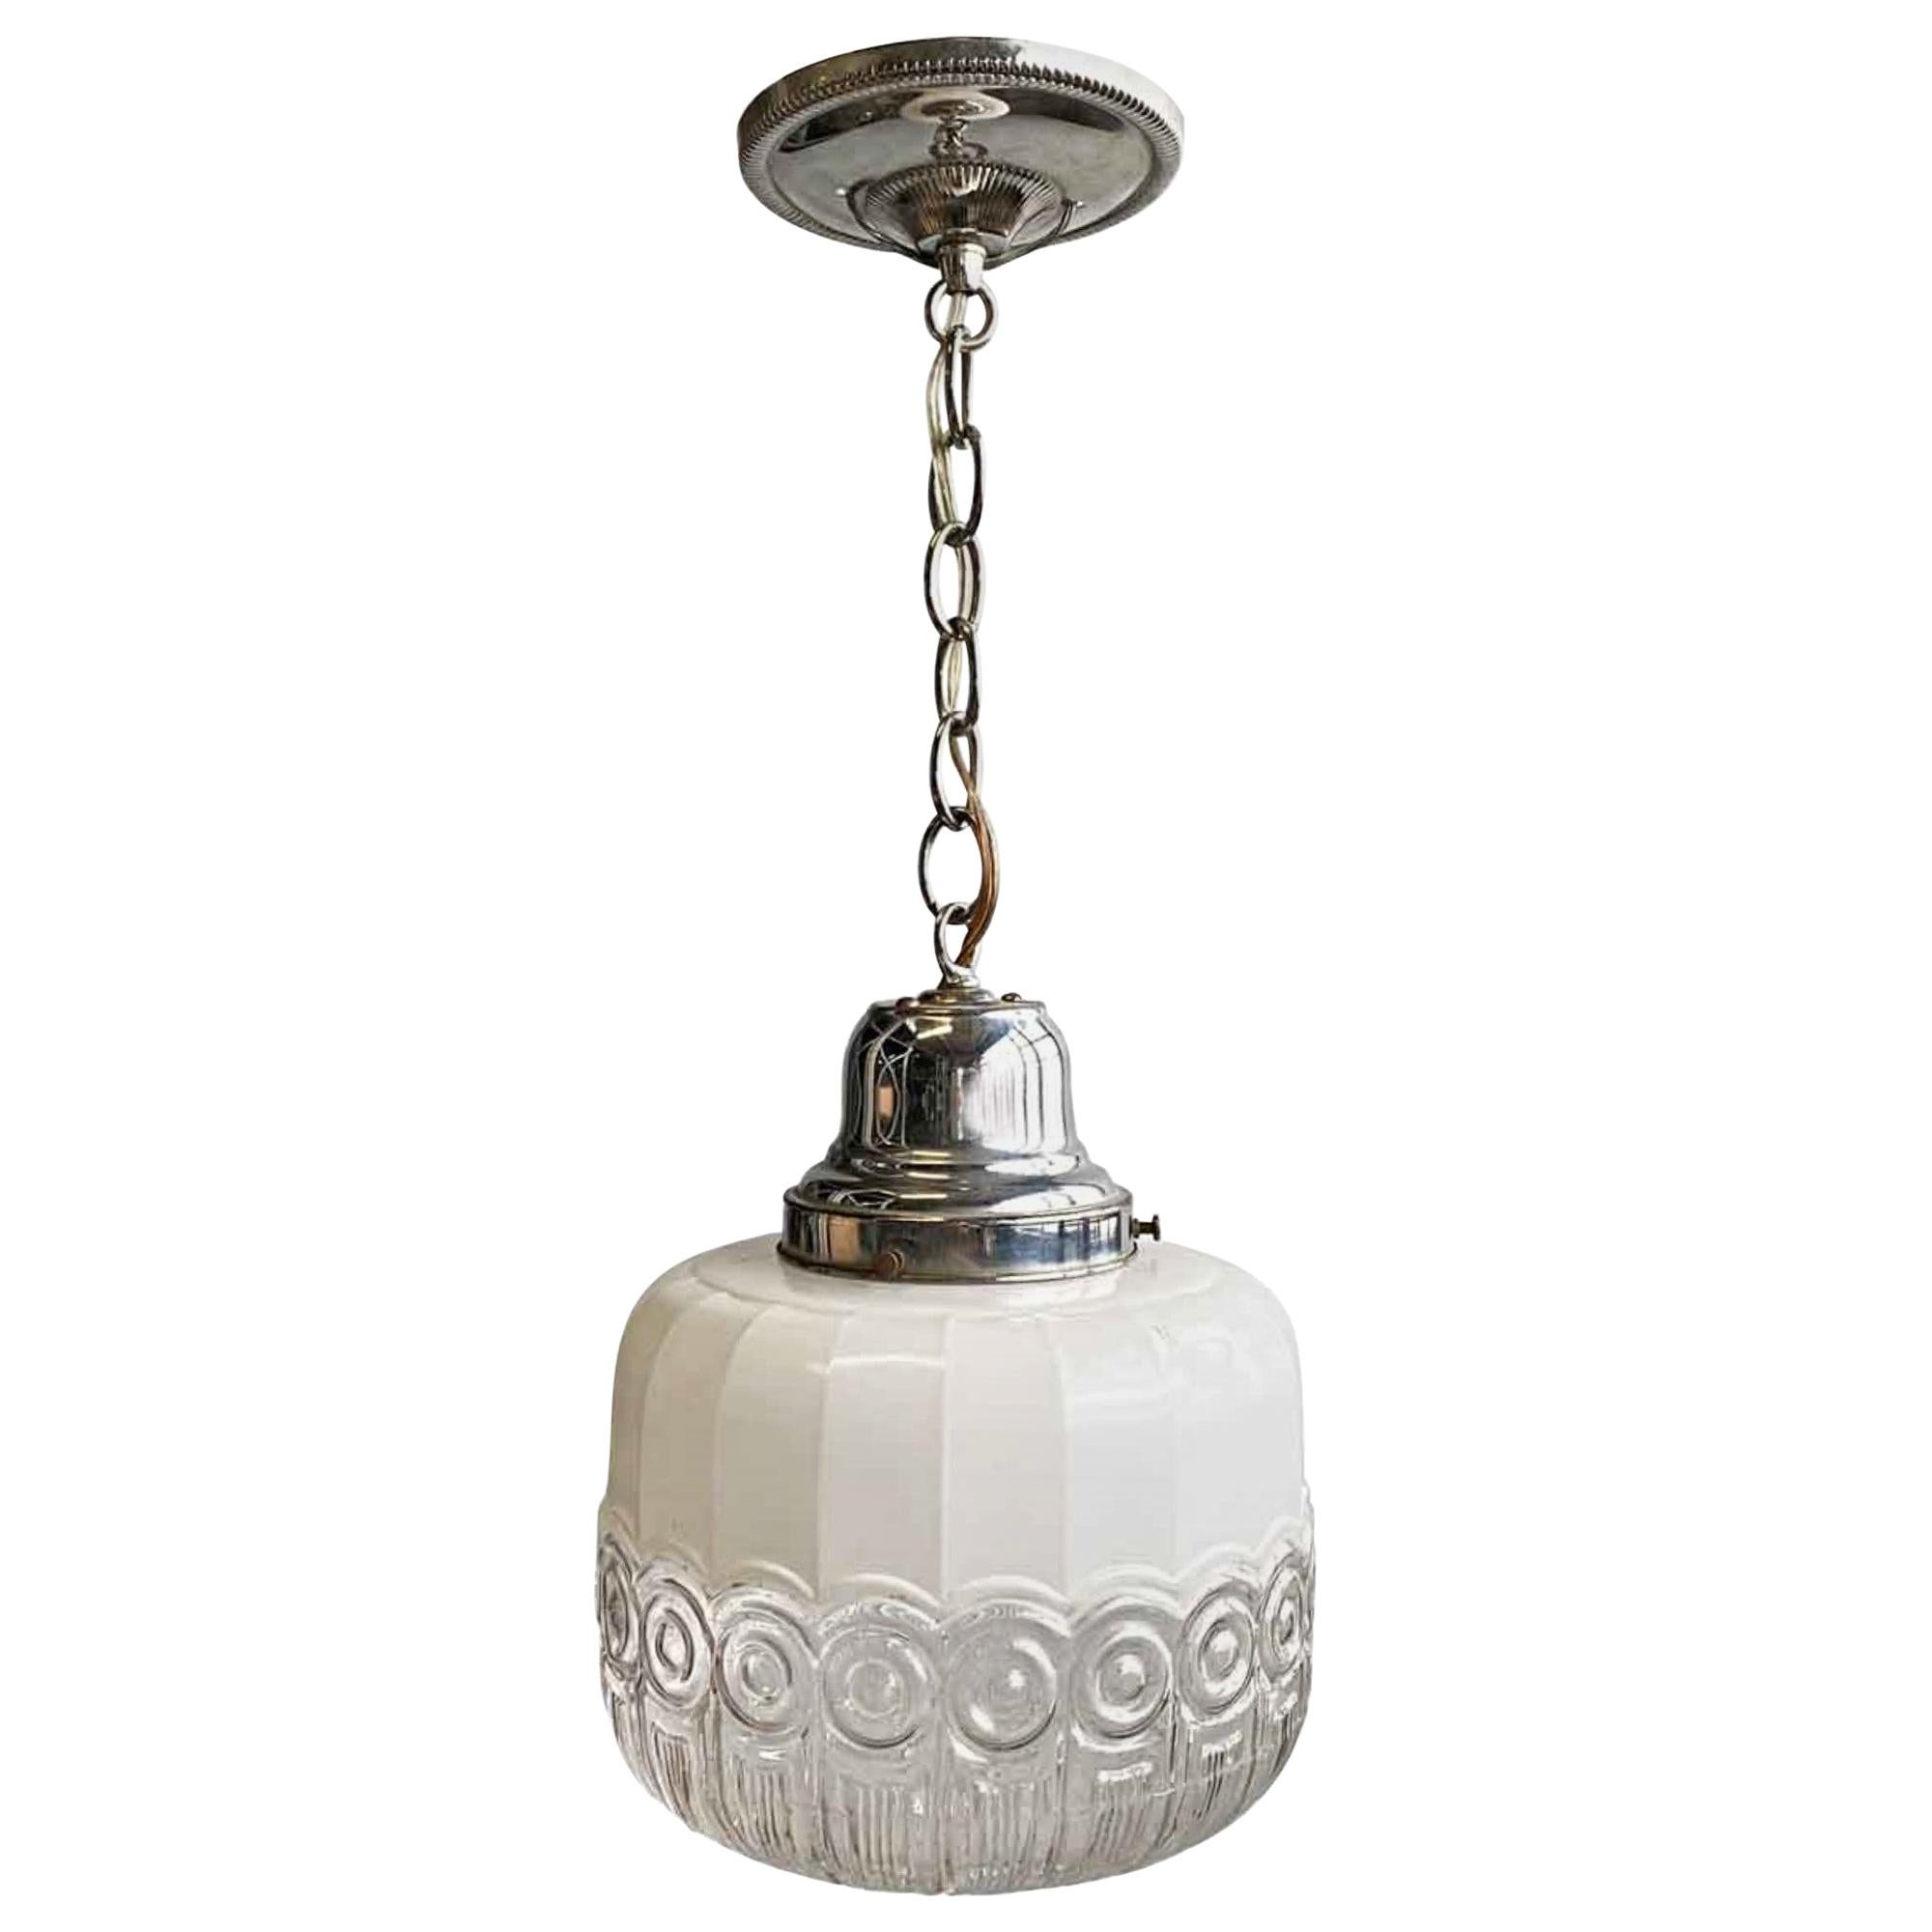 1950s Clear and Frosted Glass Globe Pendant Light with Polished Nickel Hardware